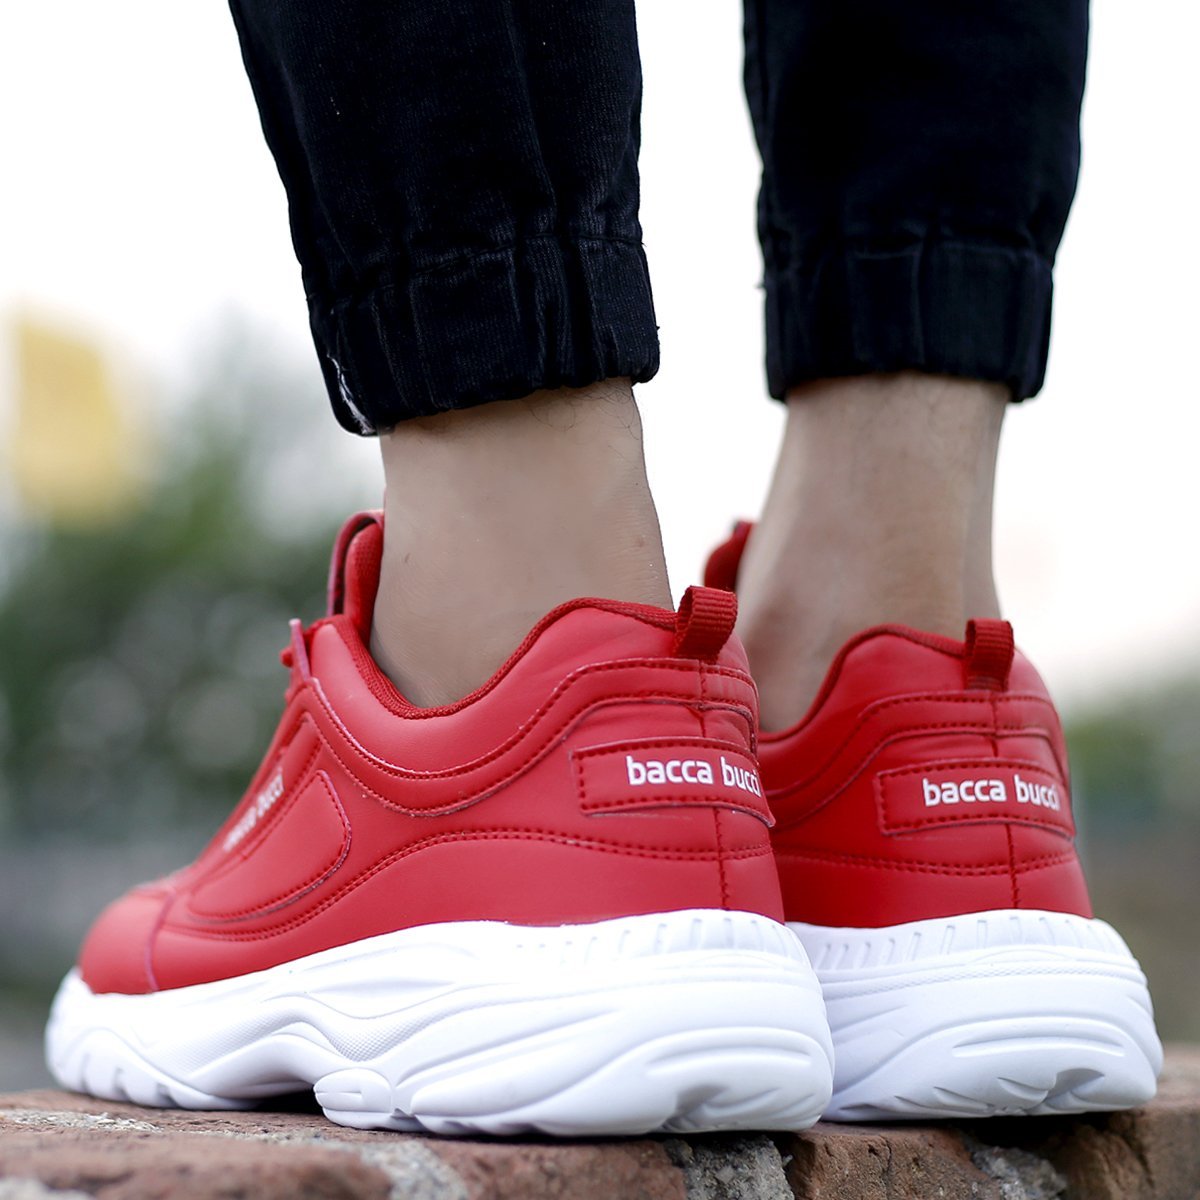 red sneakers shoes for men